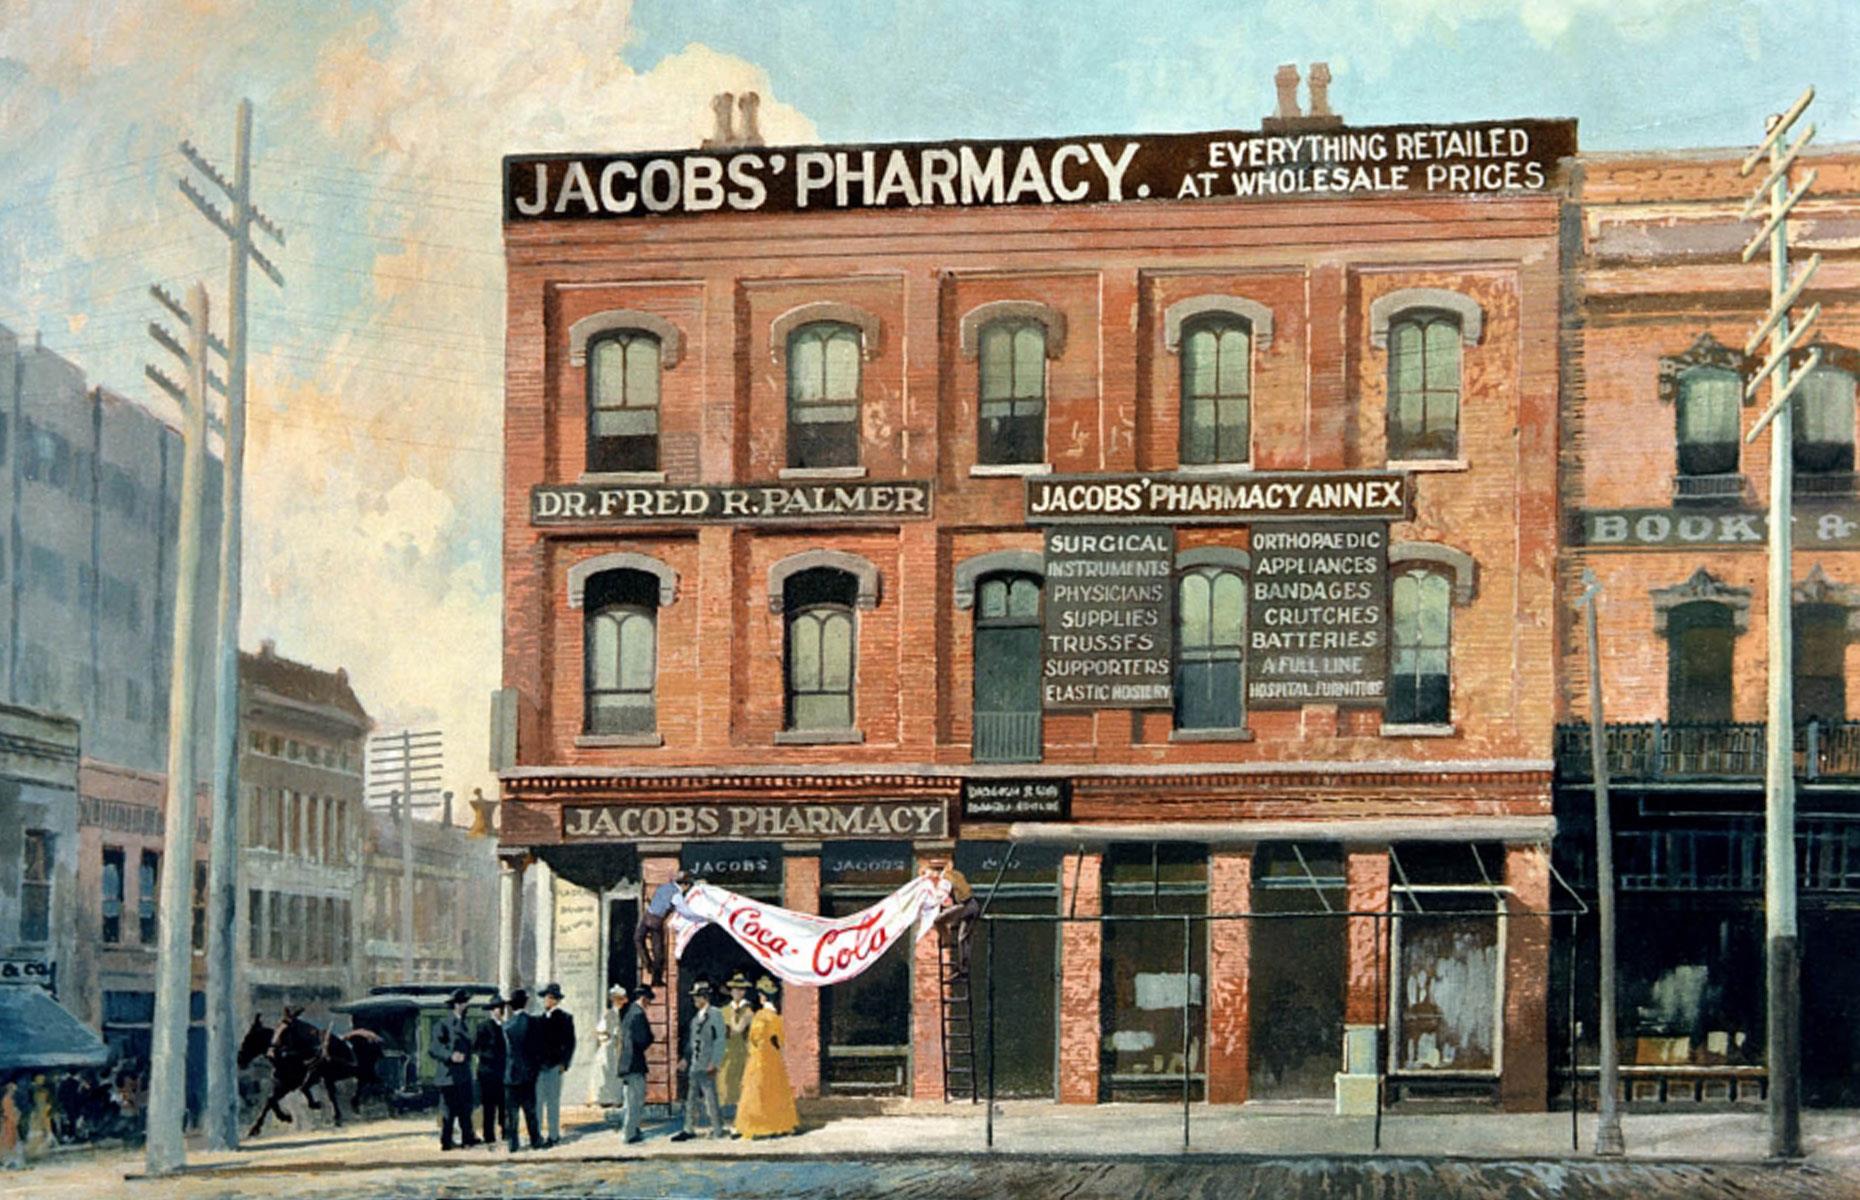 Coca-Cola was first served in an Atlanta drugstore